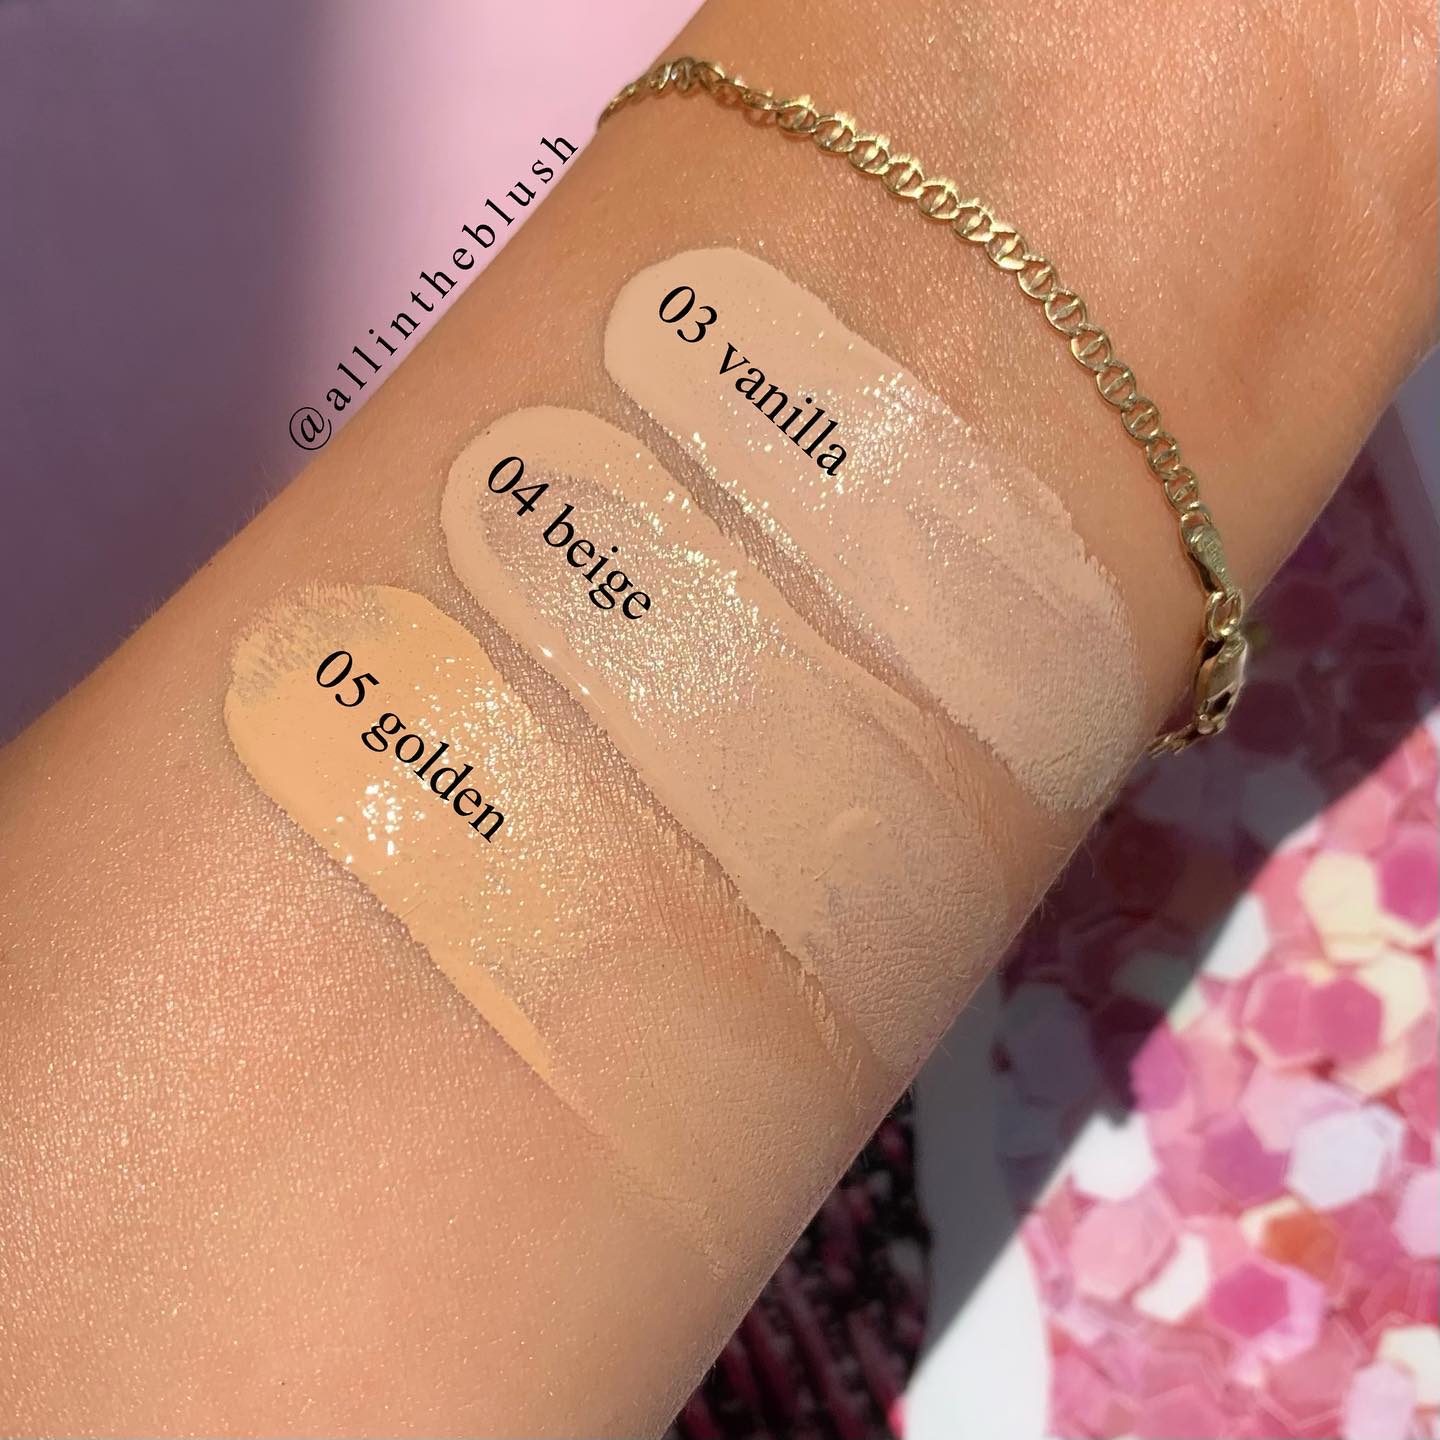 NEW Bare Me Concealer Serum from NYX: Review & Swatches - All The Blush